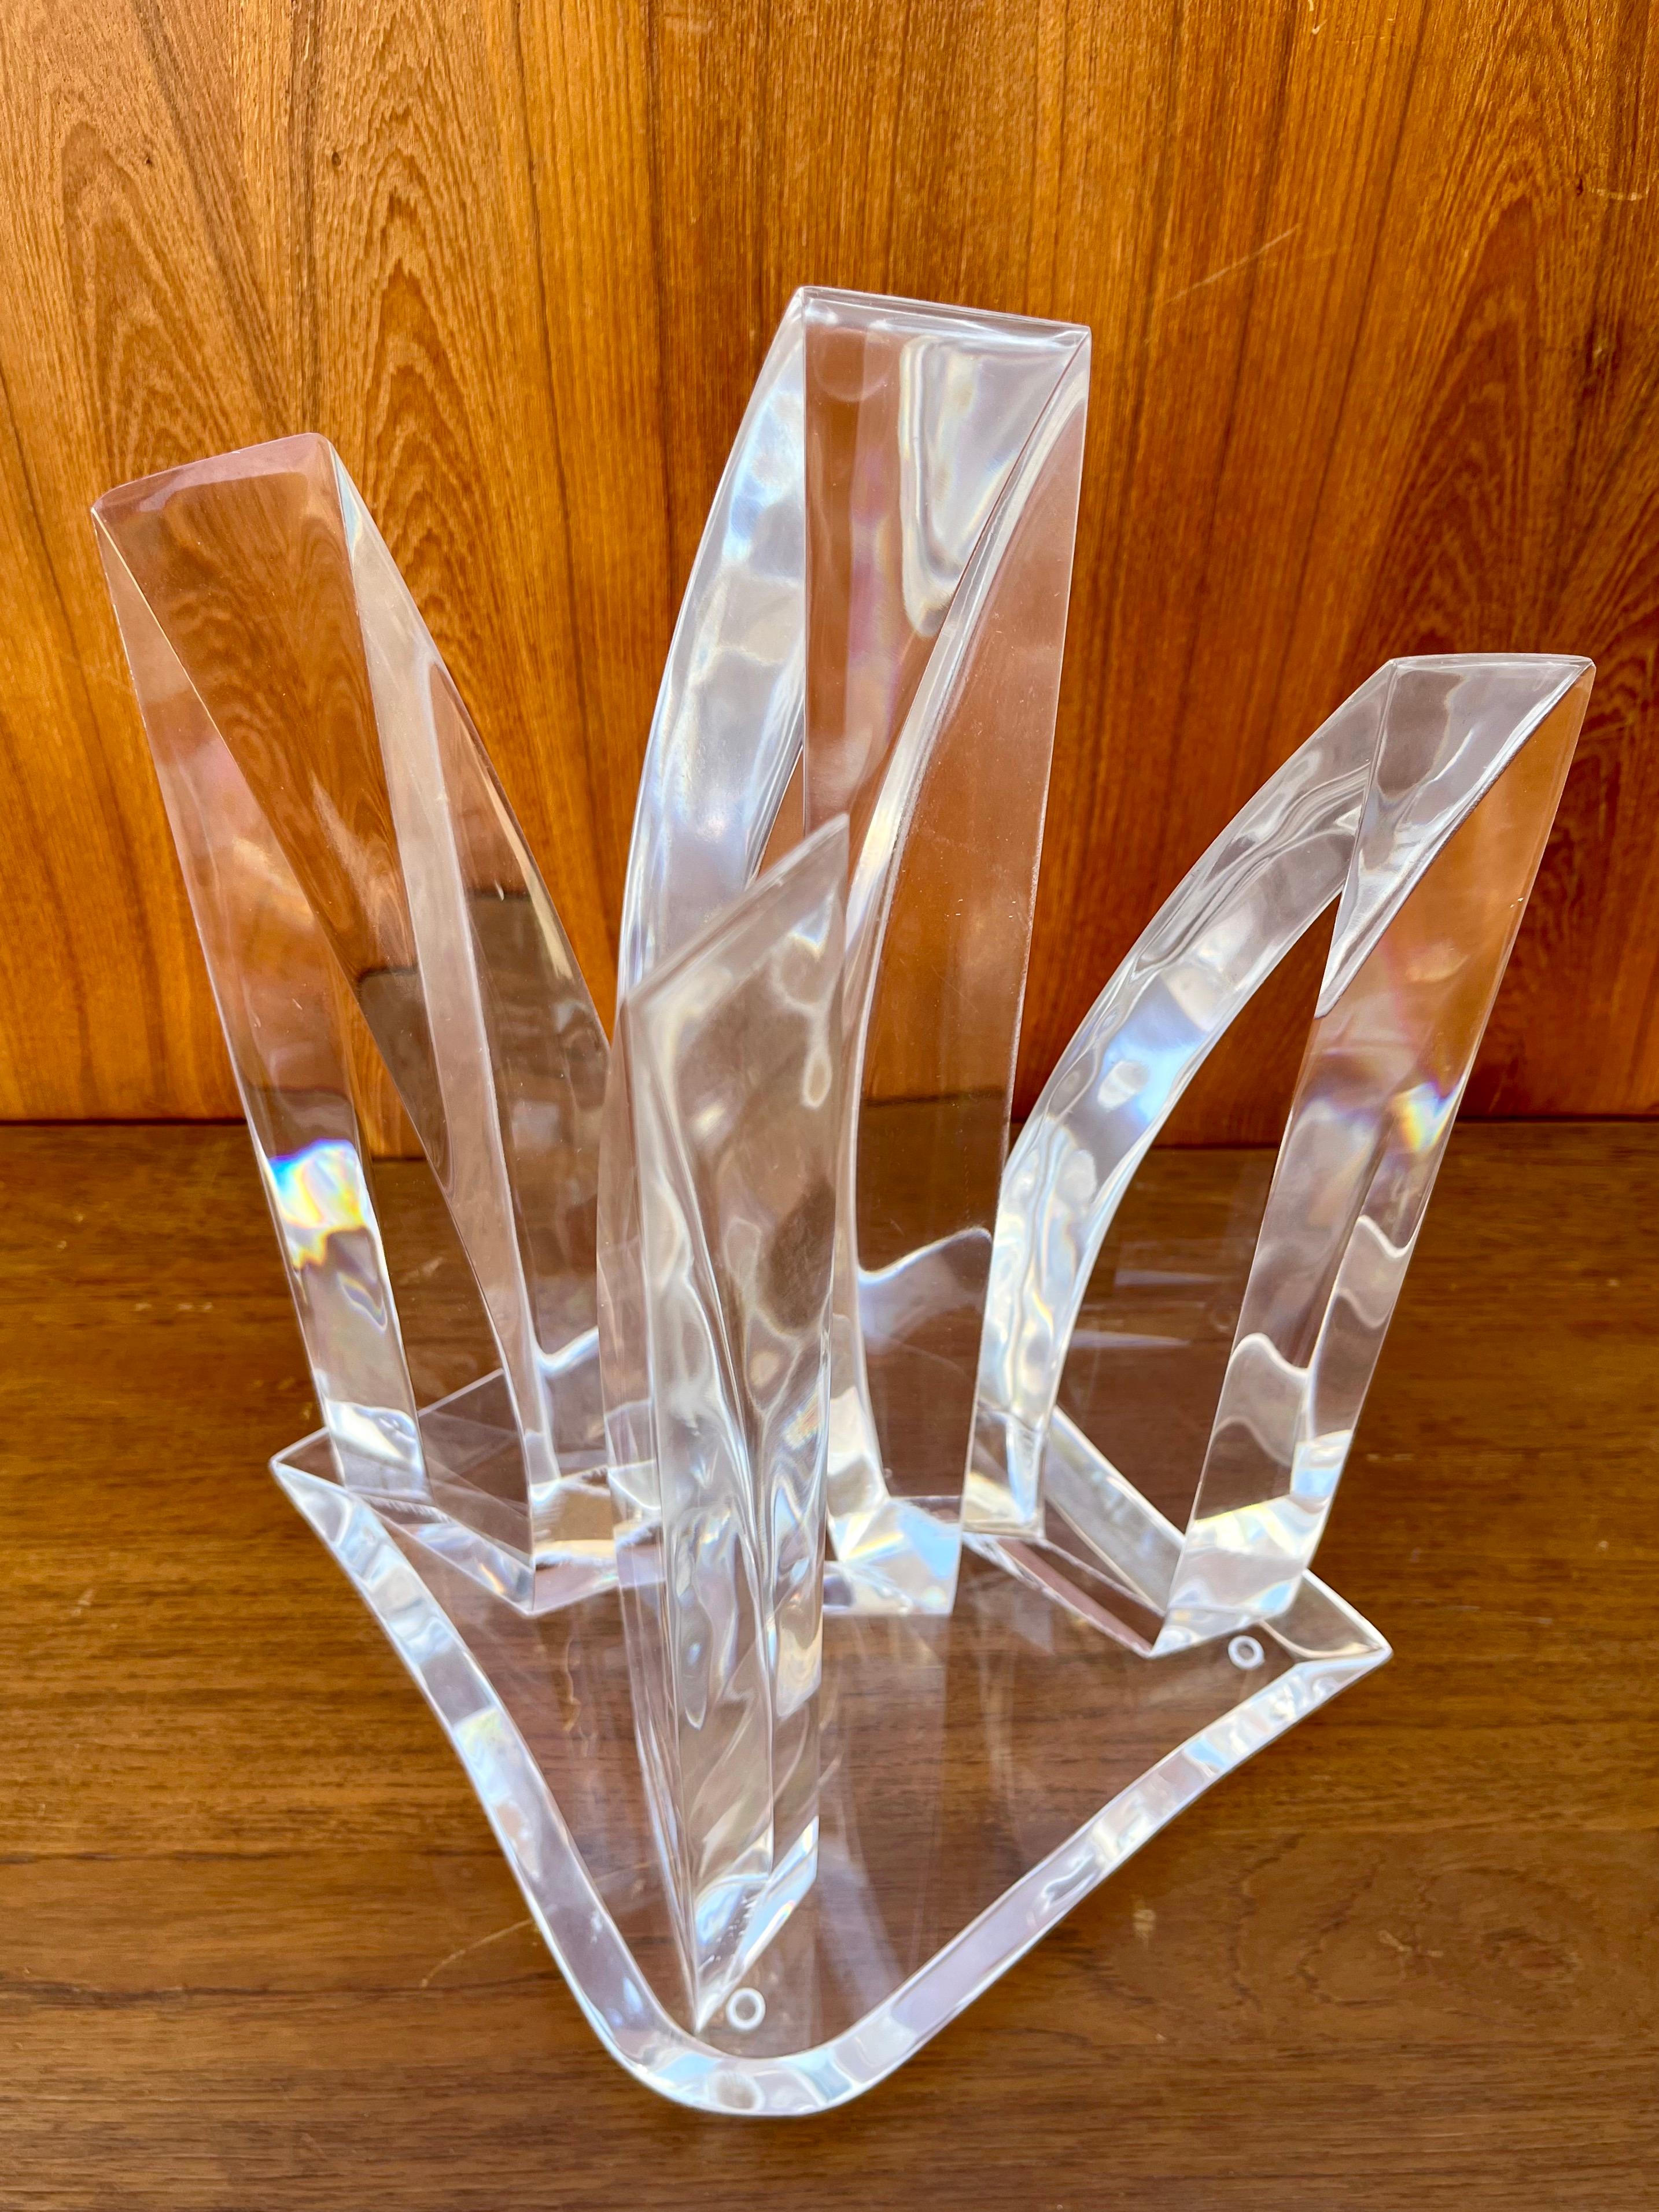 Acrylic 1970s Mid-Century Modern Abstract Lucite Sculpture in the Hivo Van Teal's Style For Sale